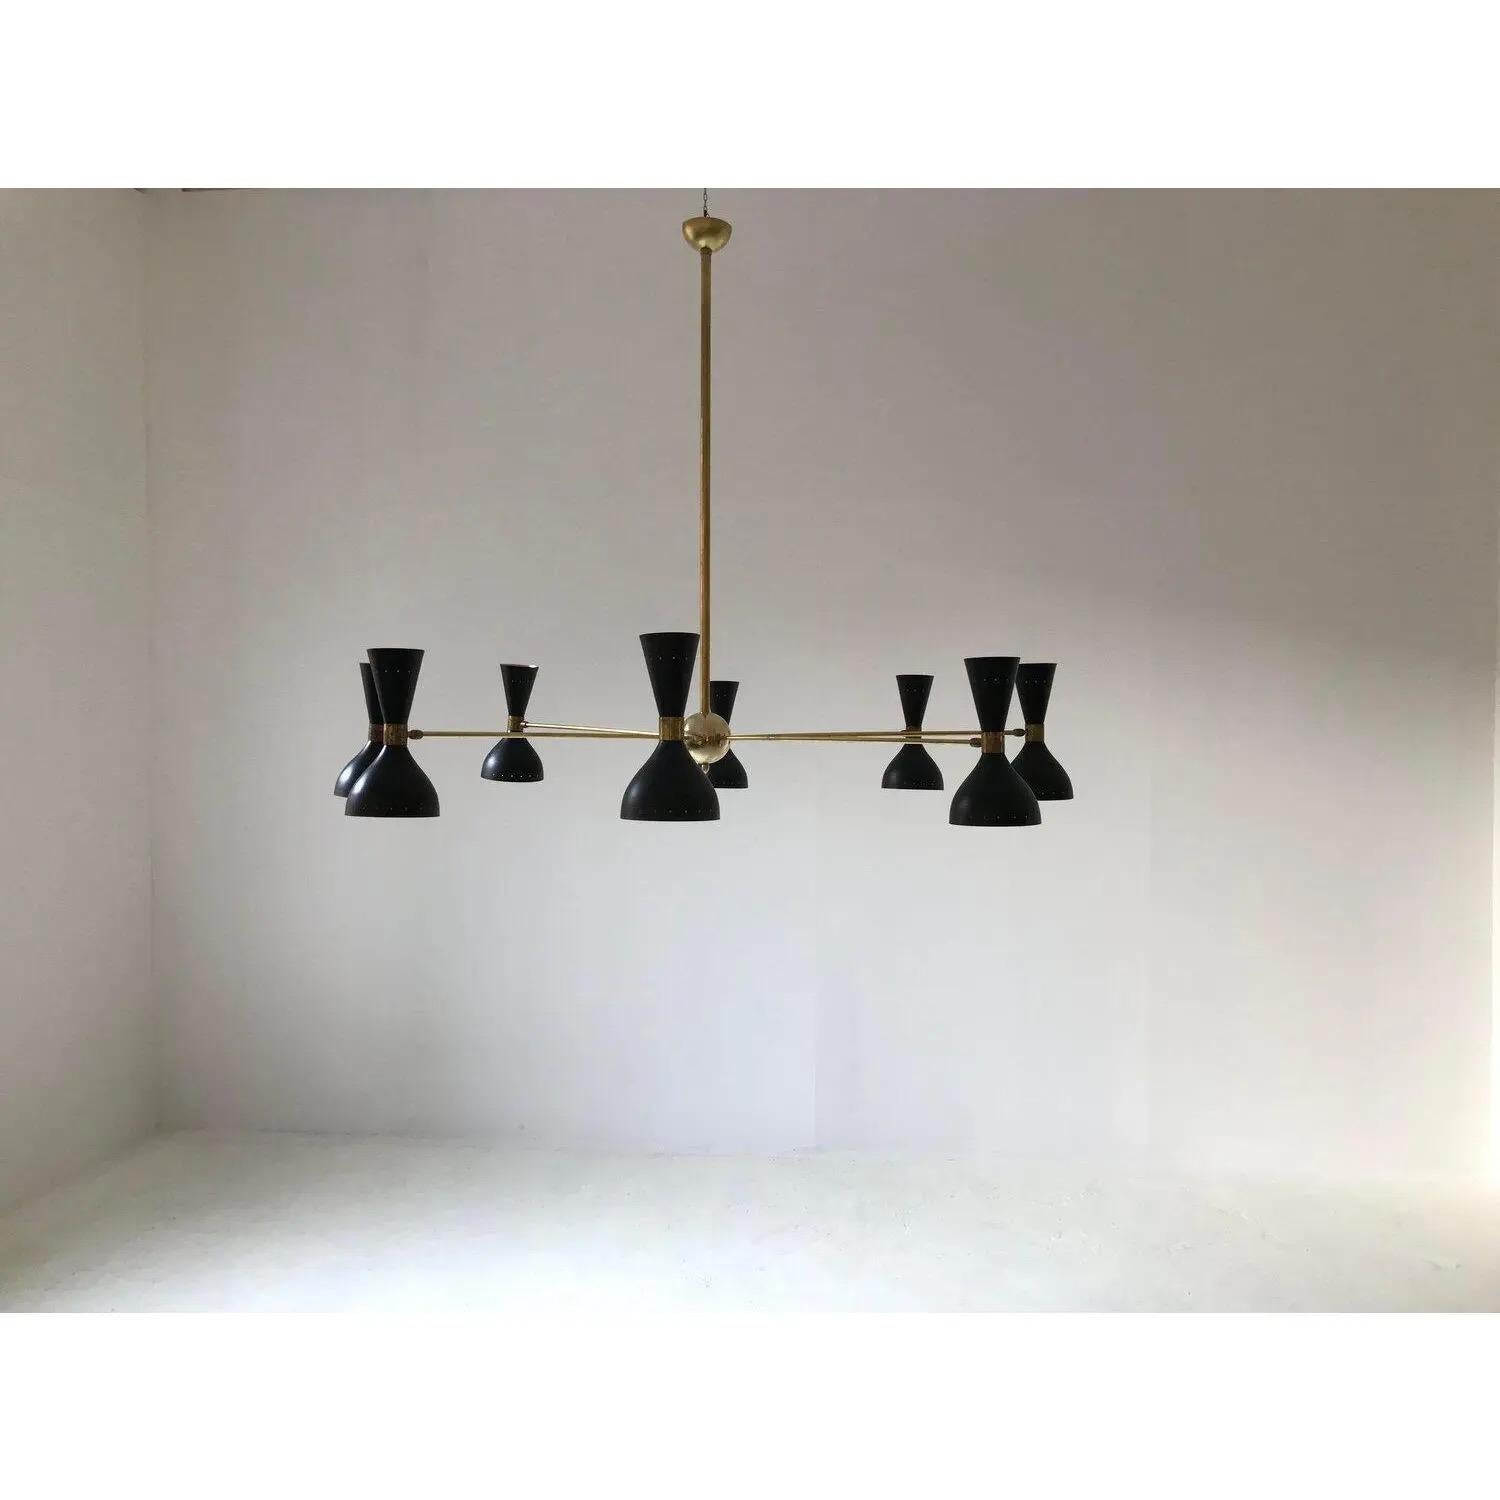 Italian 8 arms mid century style brass chandelier featuring 8 shades with double lighting, for a total of 16 lights, 2 bulbs per shade, one larger and one smaller attachment. Available in black or ivory white, with white or gold shade interiors. On